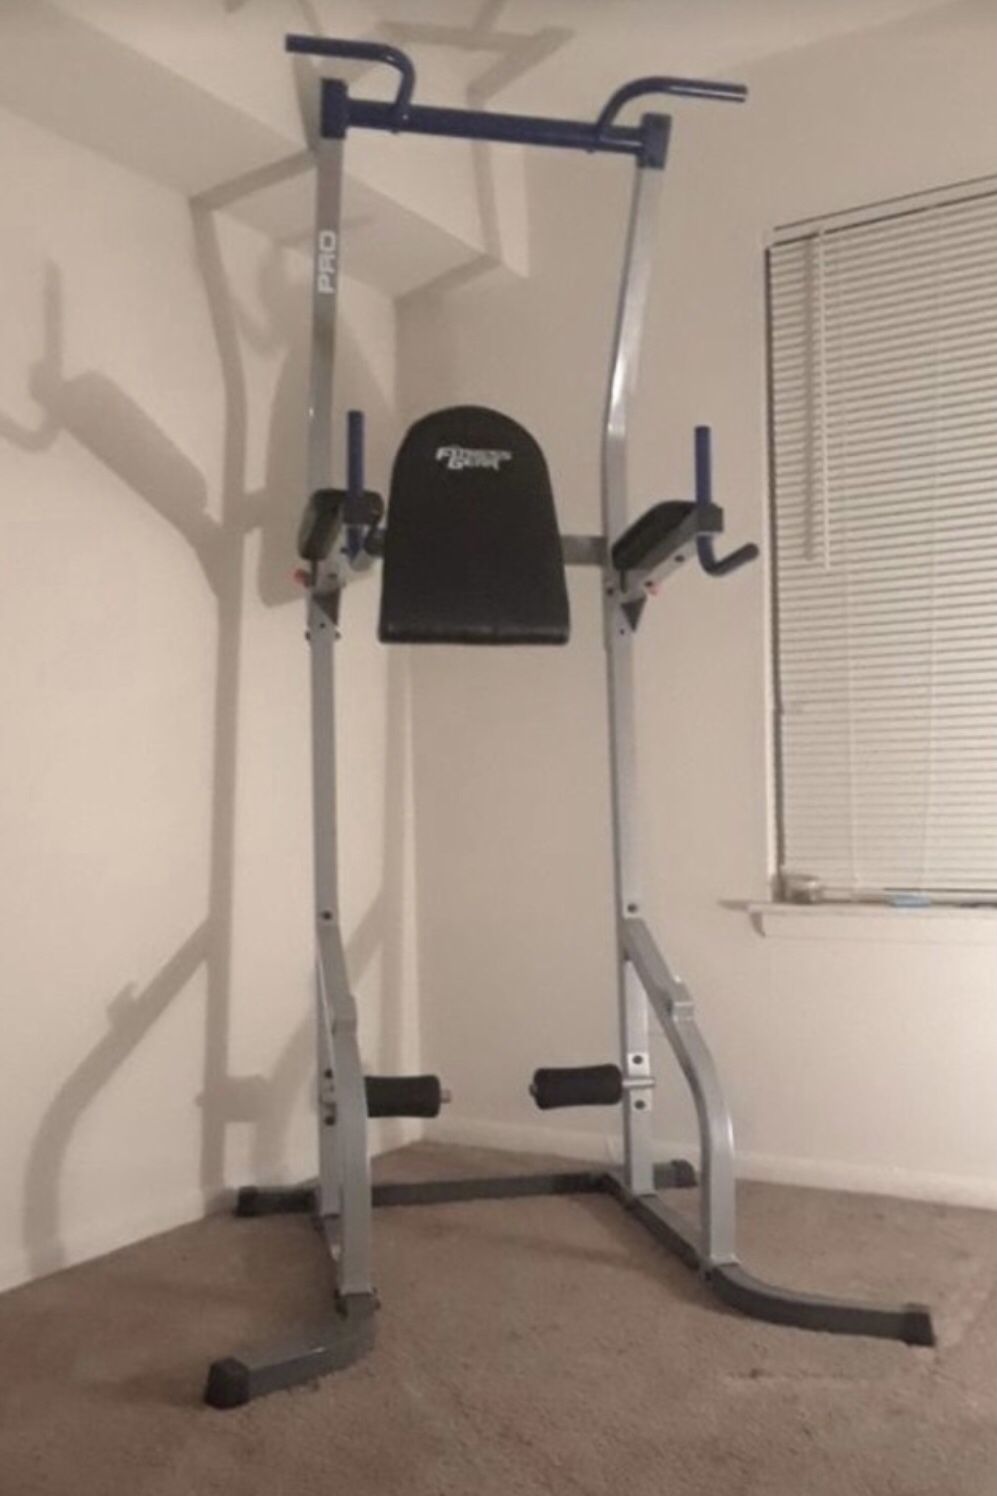 Brand New! Full Body Workout Station / Power Tower 